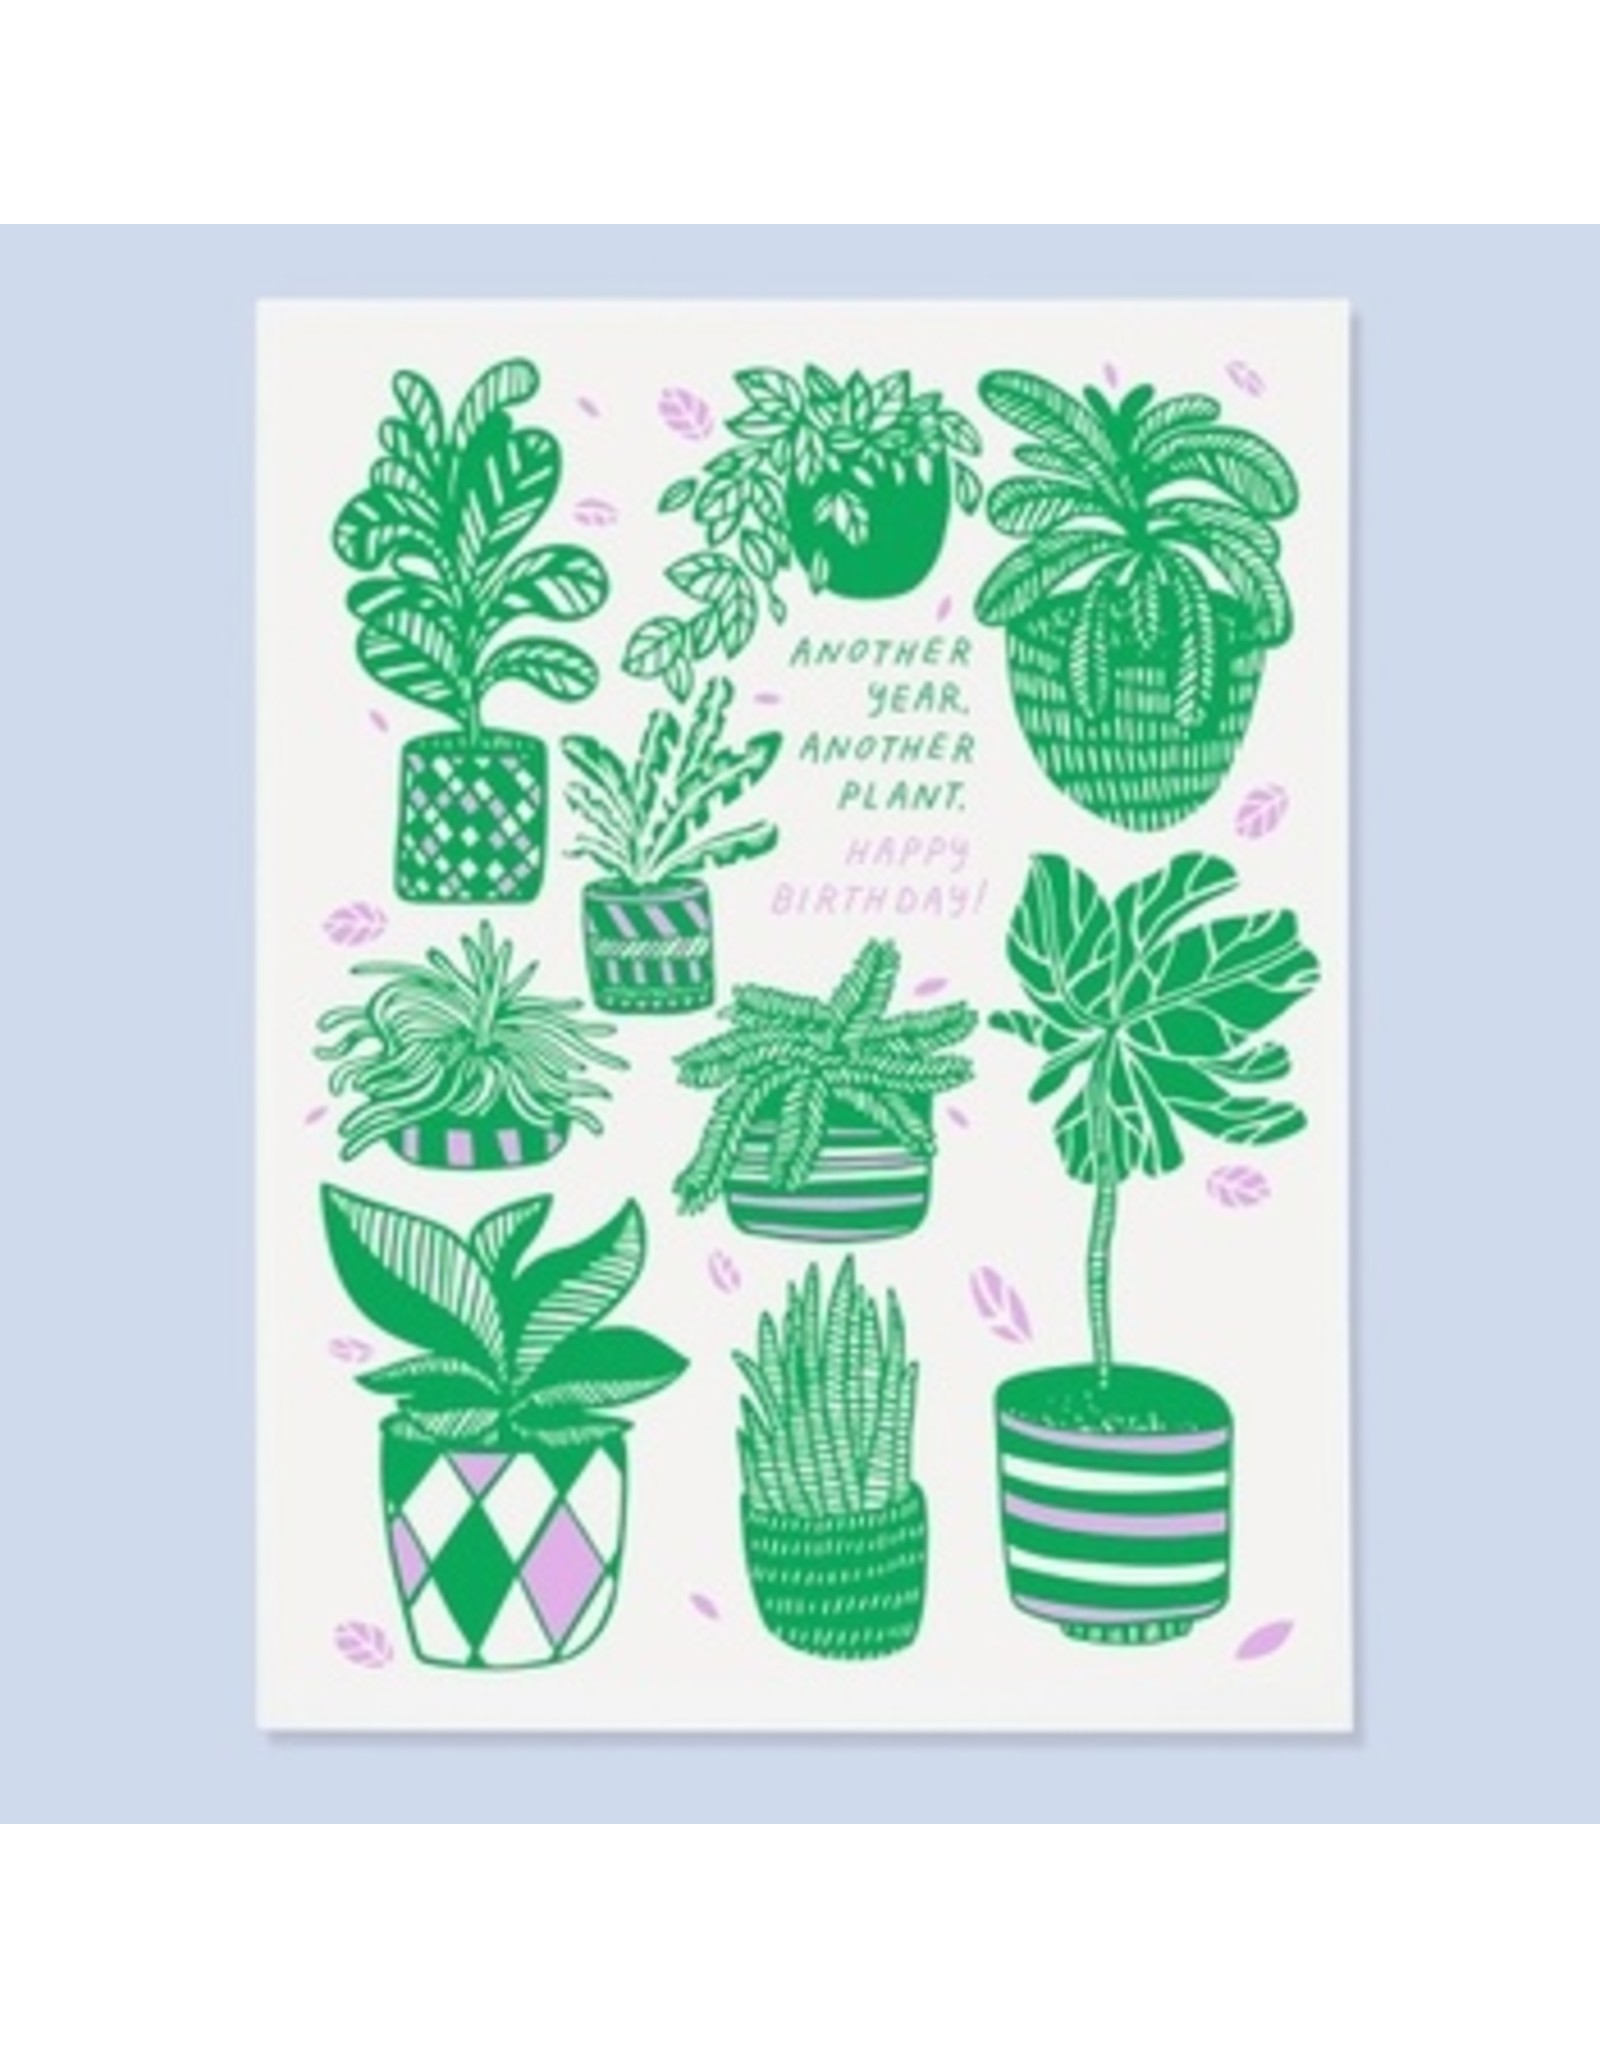 Another Plant Birthday Card